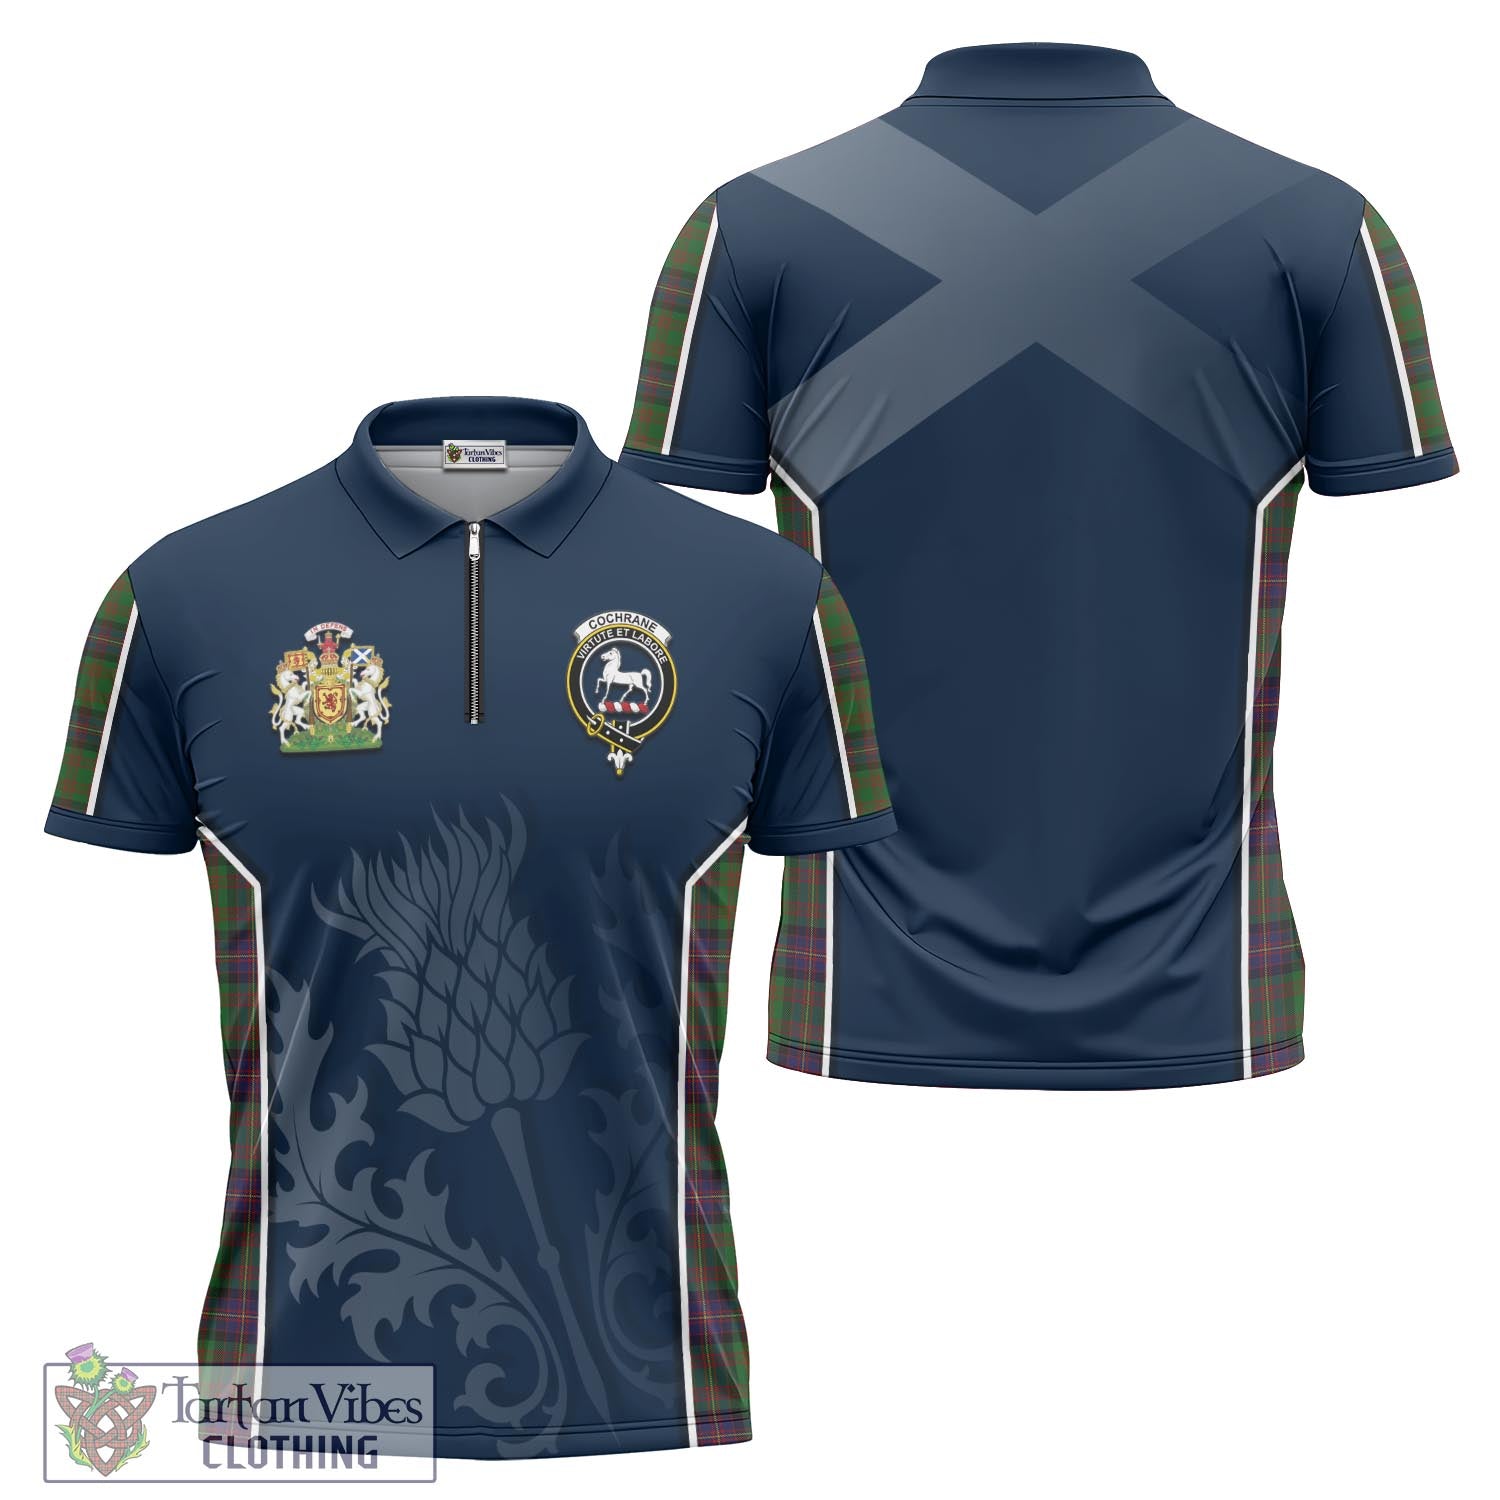 Tartan Vibes Clothing Cochrane Tartan Zipper Polo Shirt with Family Crest and Scottish Thistle Vibes Sport Style